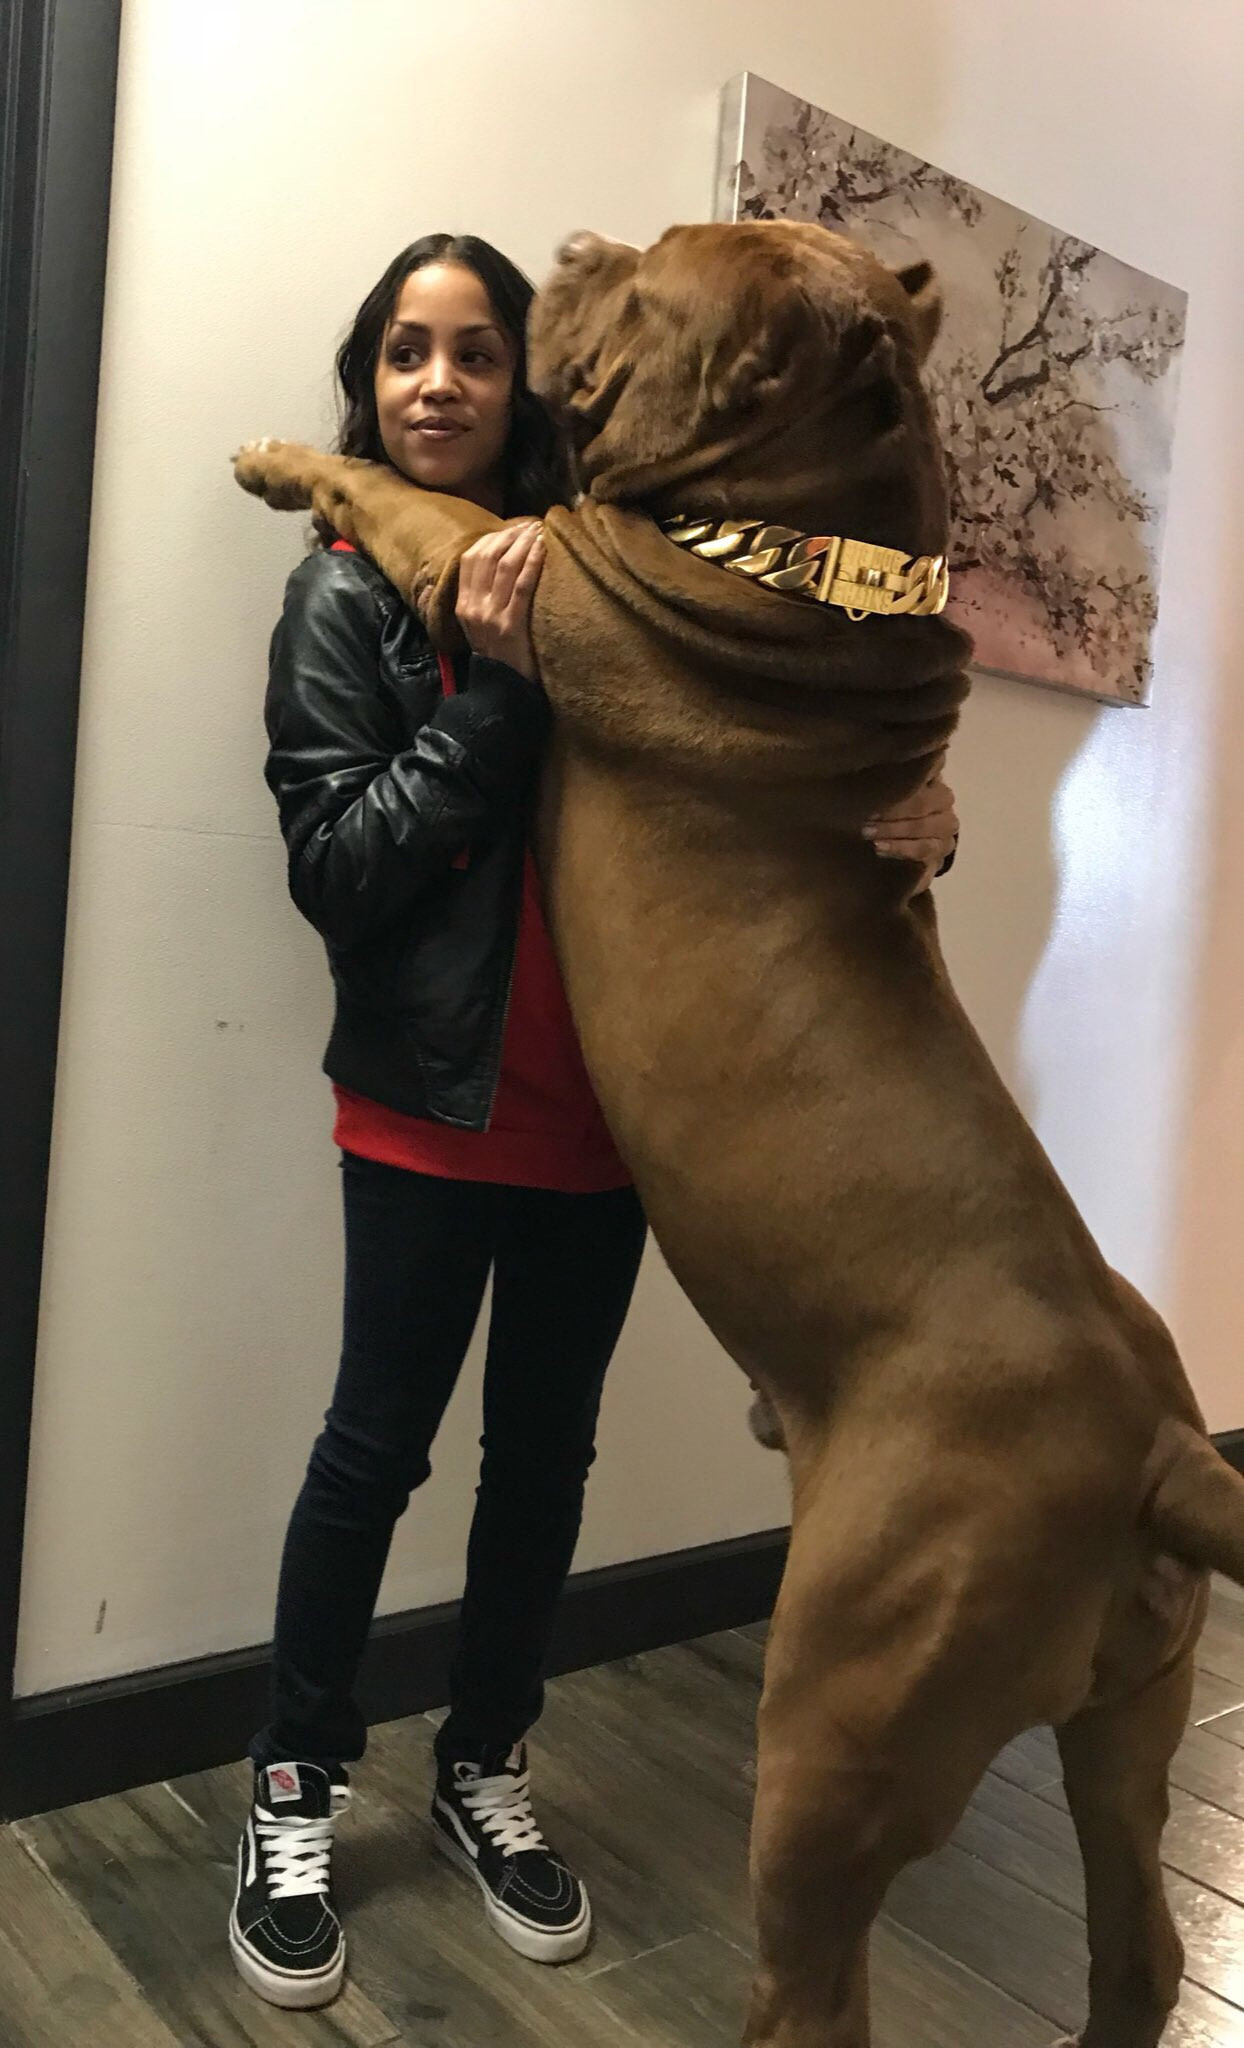 Check out this insanely huge dog